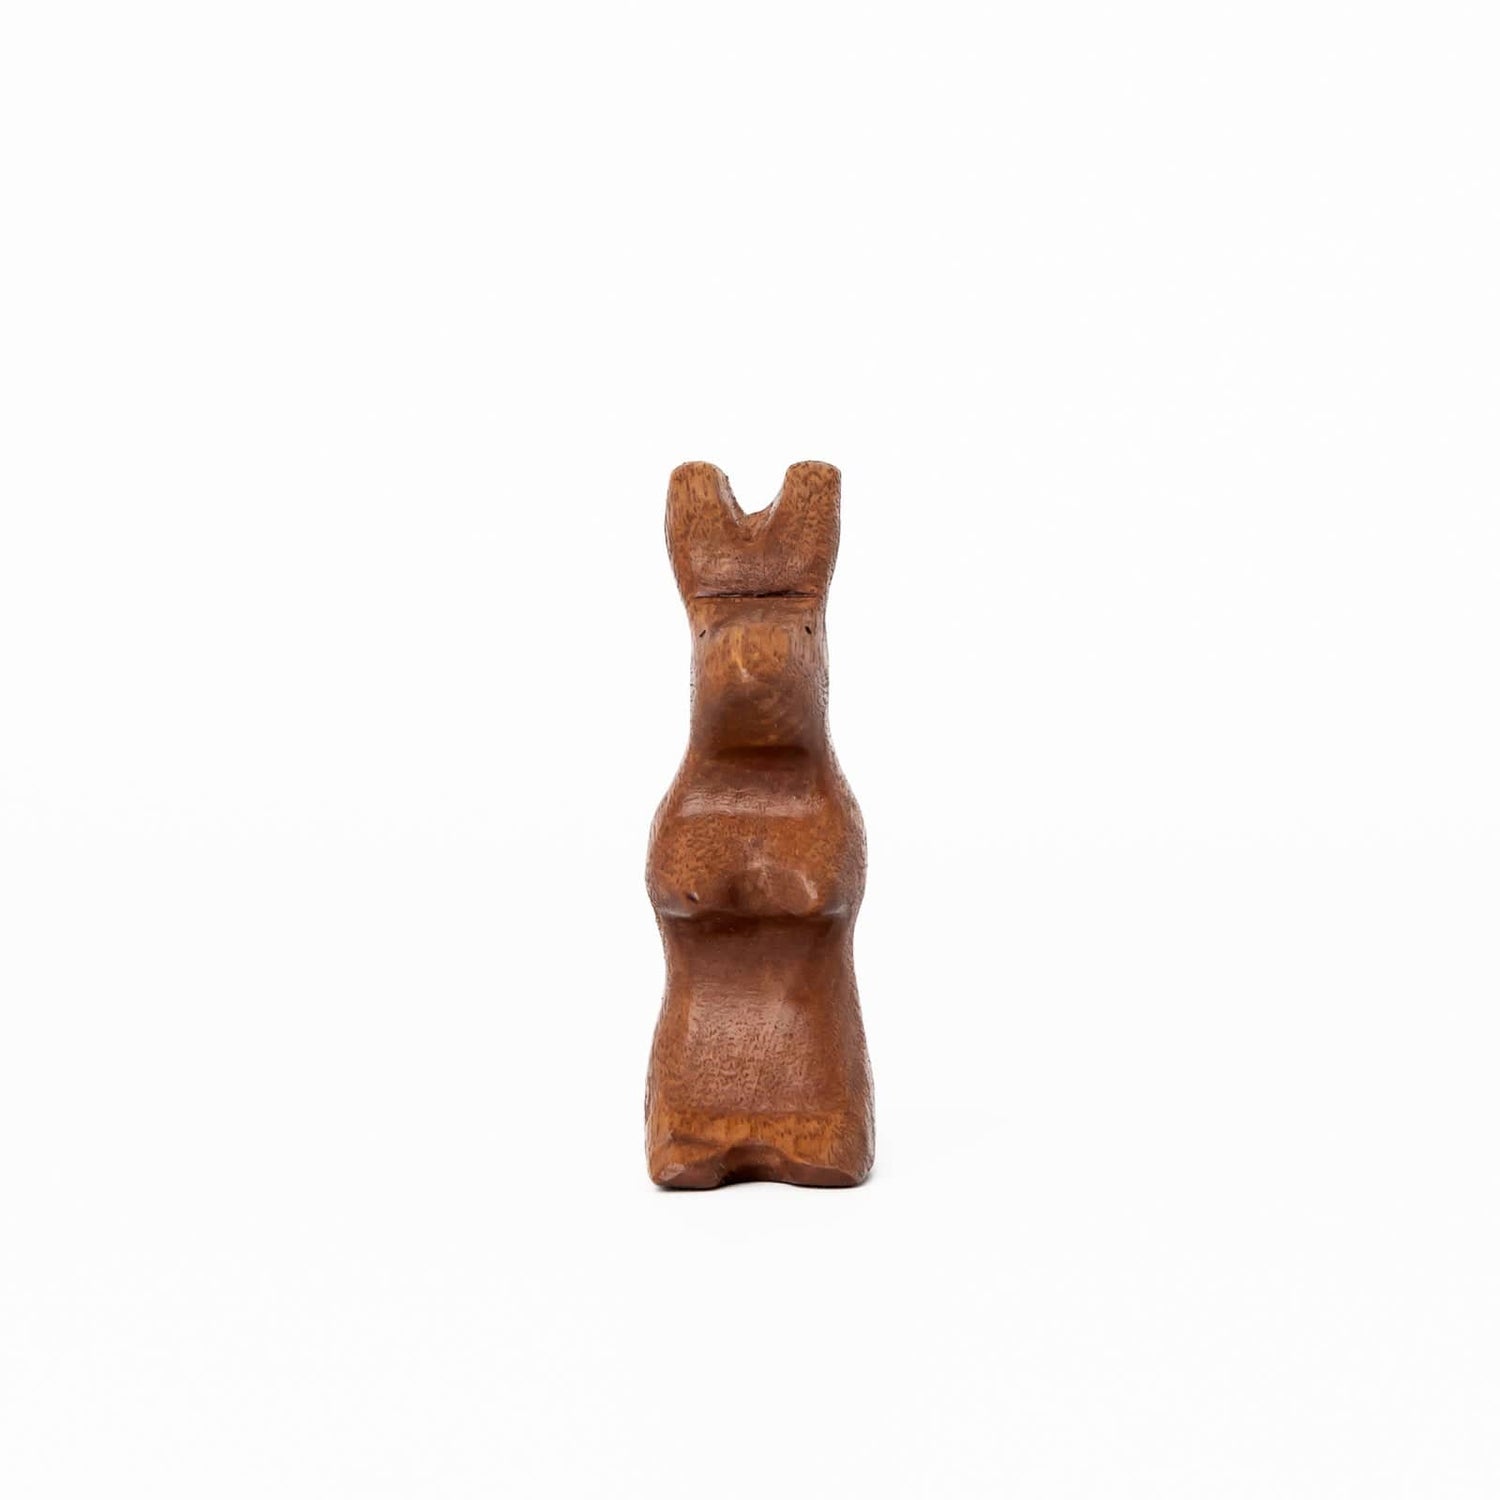 Bumbleberry Toys Wooden Animals "Beth Bunny" Wooden Animal Toy (Handmade in Canada)